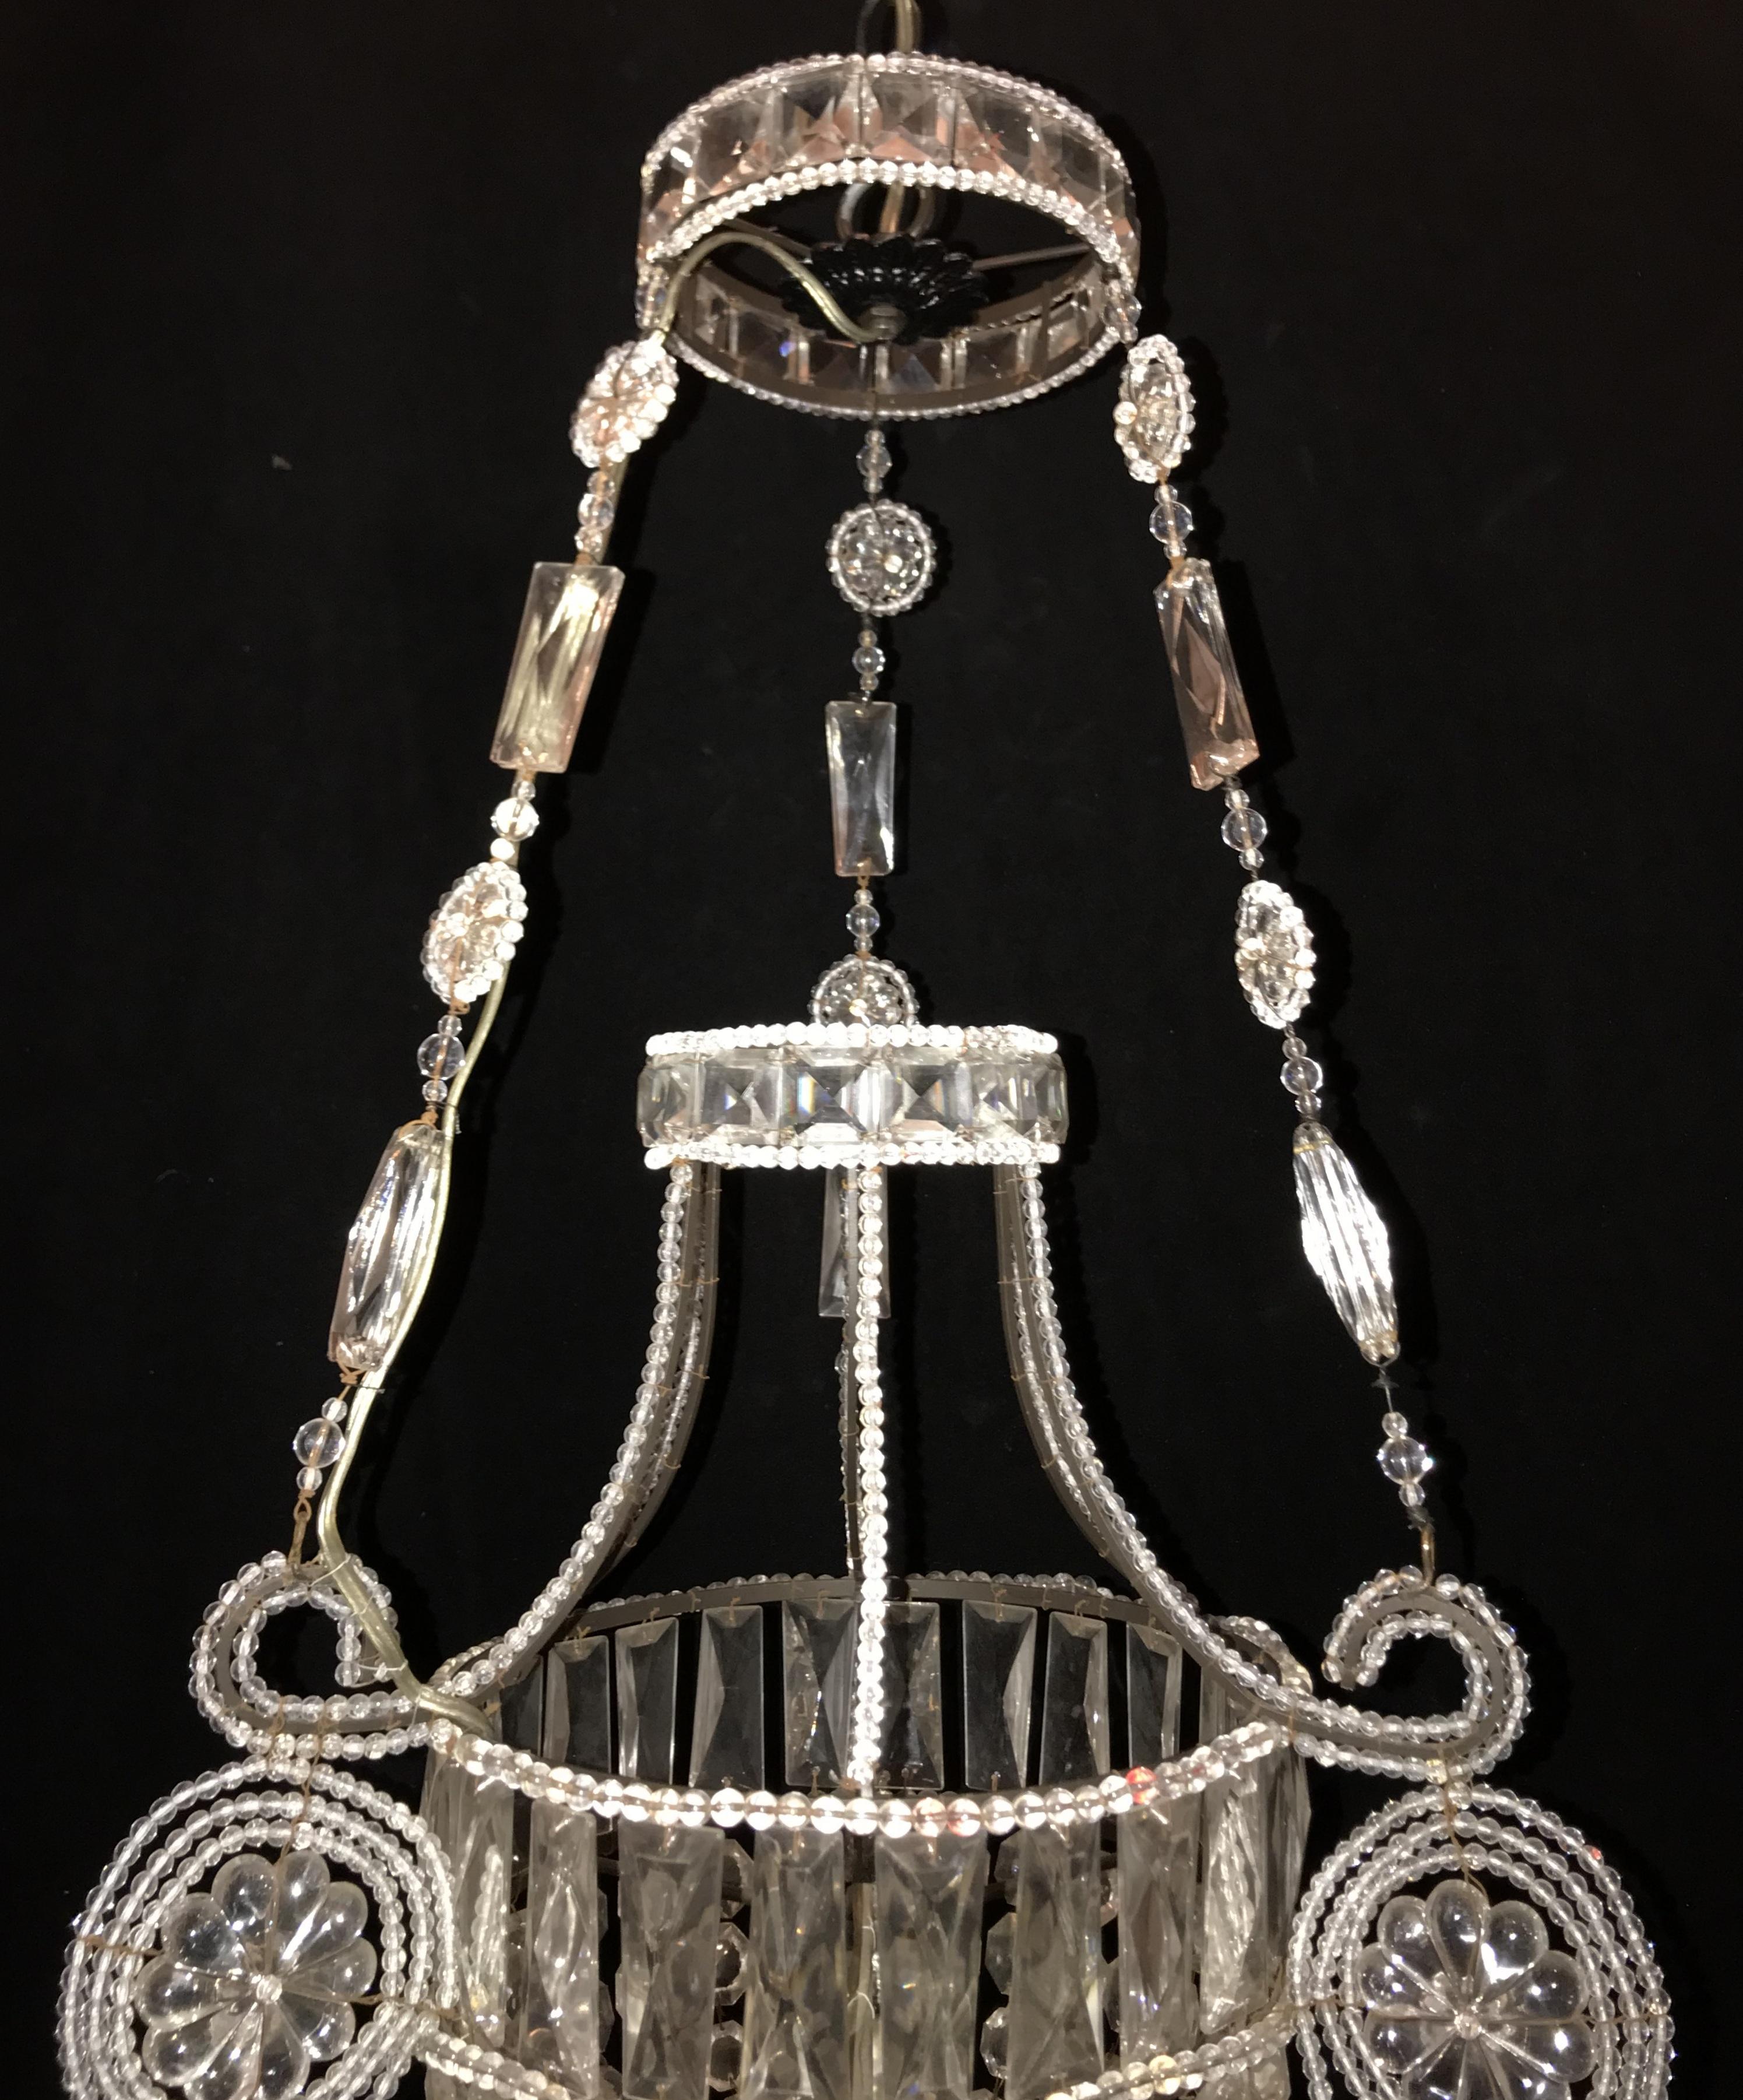 A wonderful pair of Italian beaded crystal / glass basket / urn form pendent chandeliers / fixtures with single Edison bulbs each.
The height is adjustable to your needs.
Two available,
Sold separately.